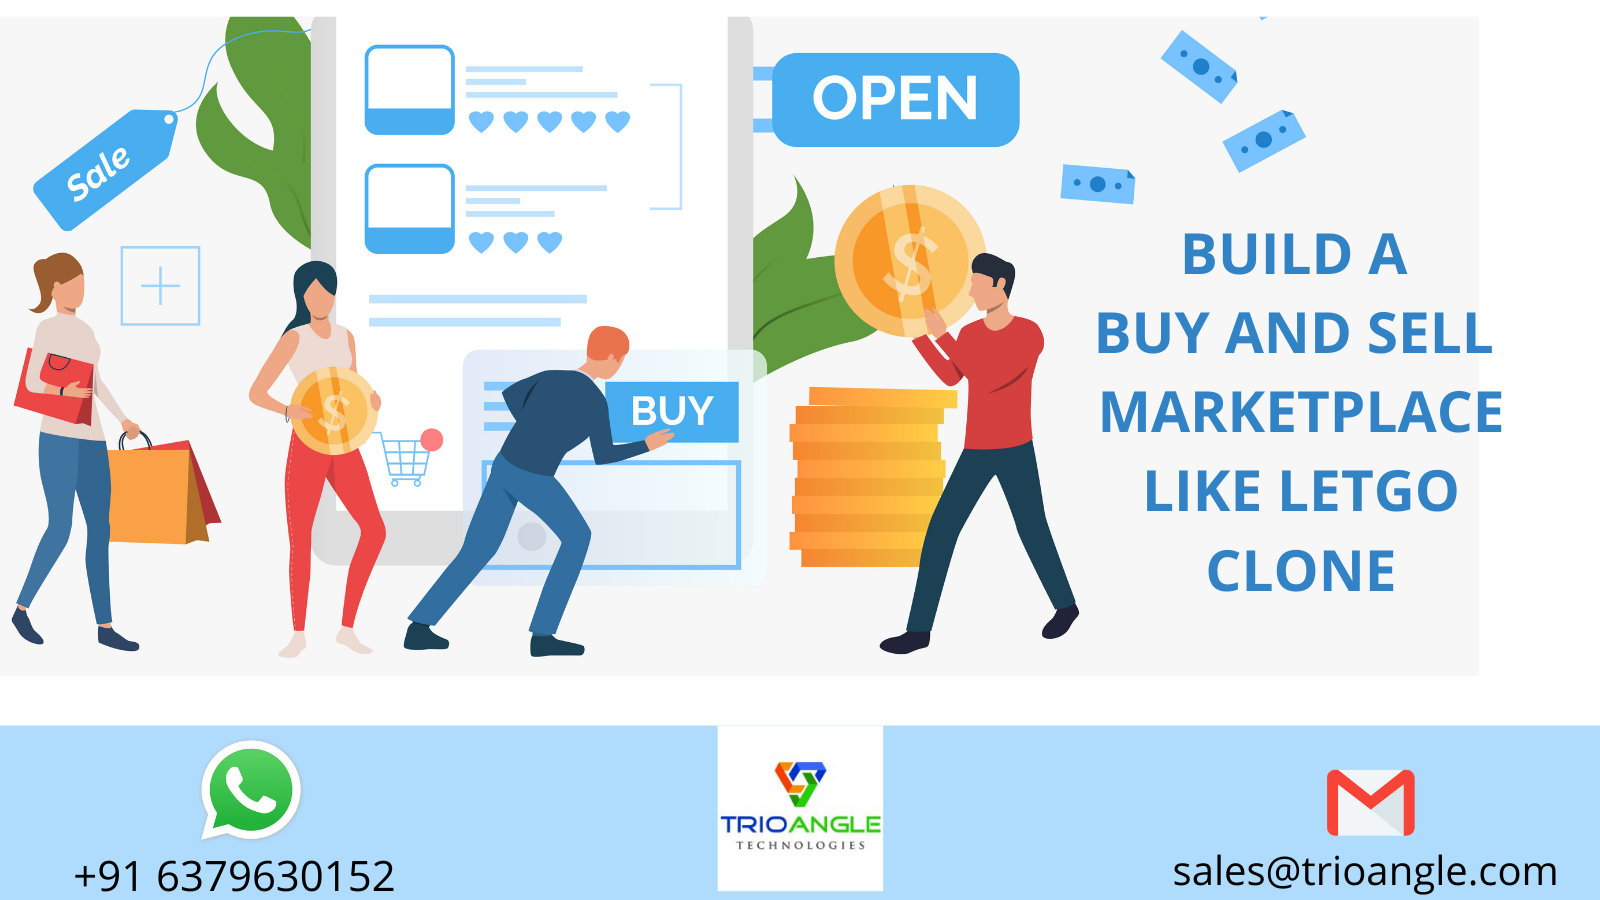 BUILD A BUY AND SELL MARKETPLACE LIKE LETGO CLONE-d0382f24